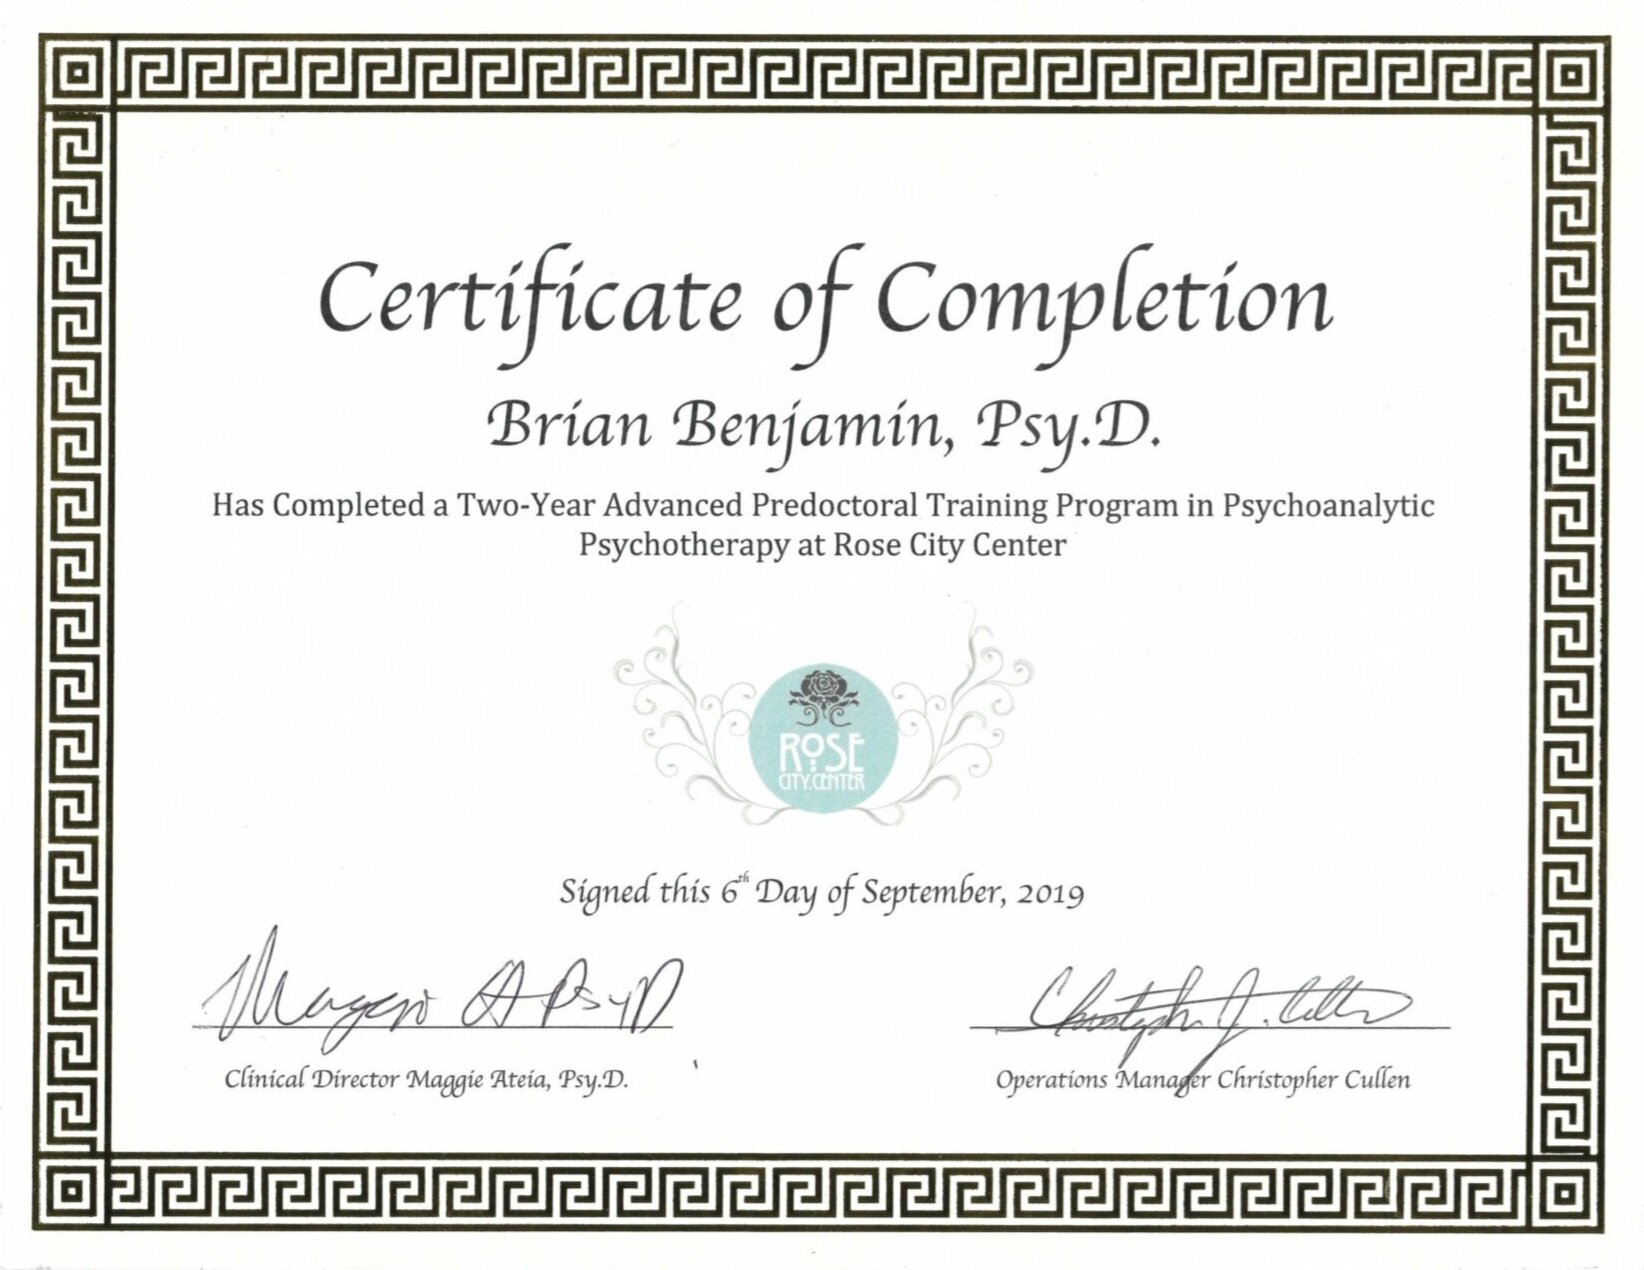 Certificate of Completion - Advanced training program in Psychoanalytic Psychotherapy